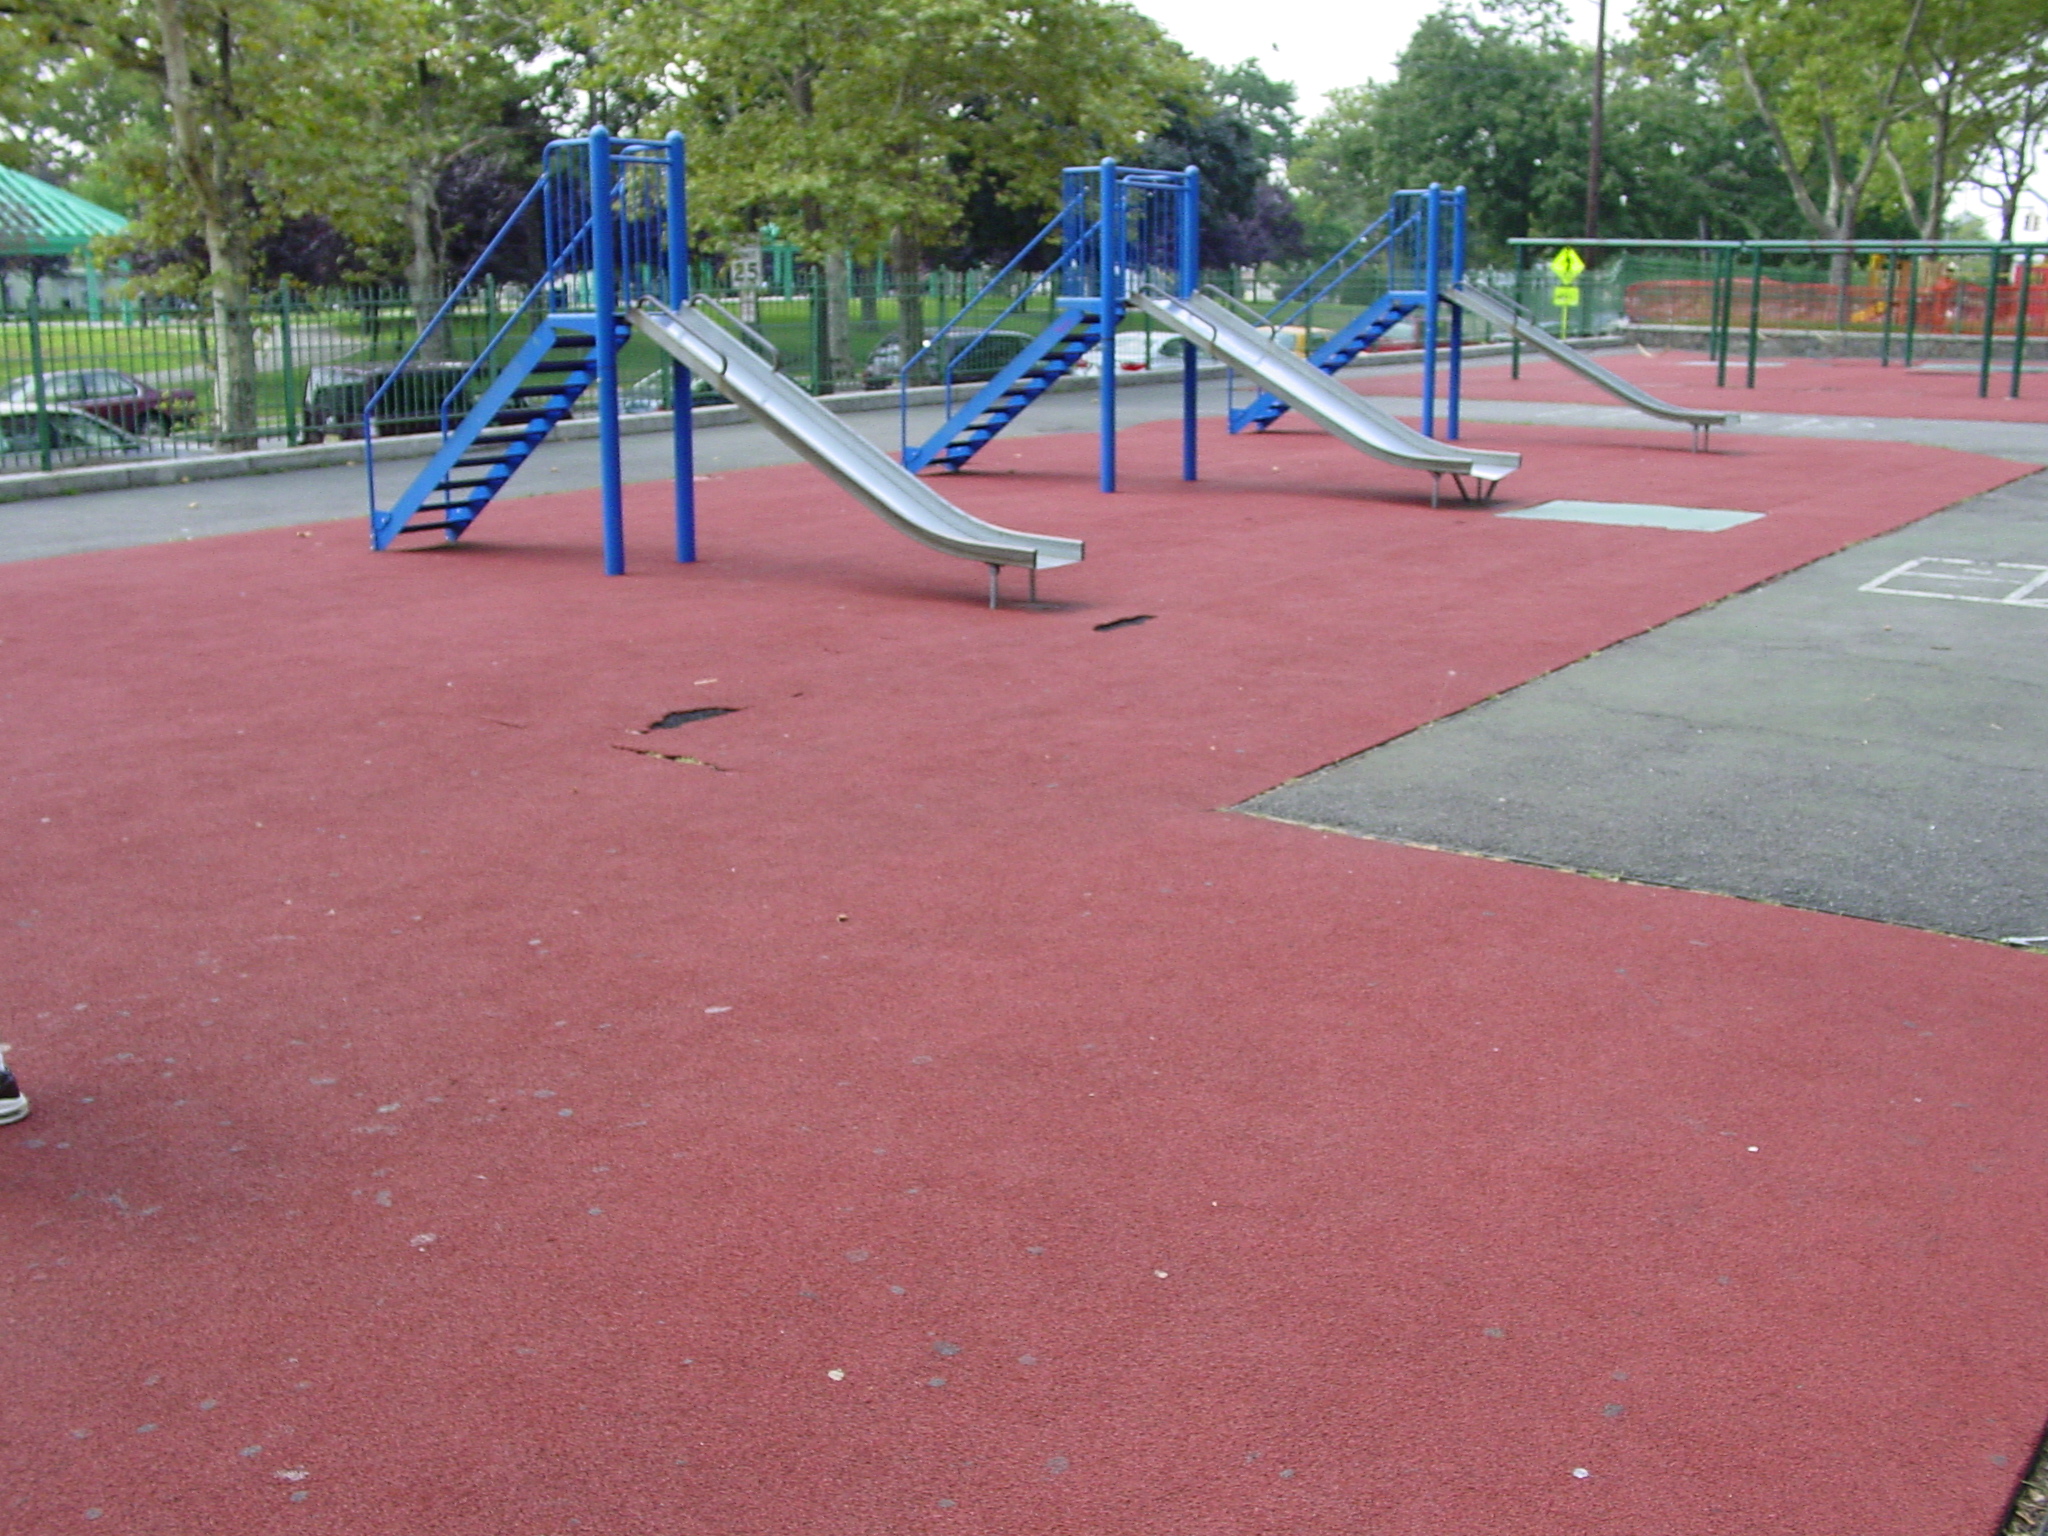 Large Public Park with Multiple Playgrounds Using Designs q